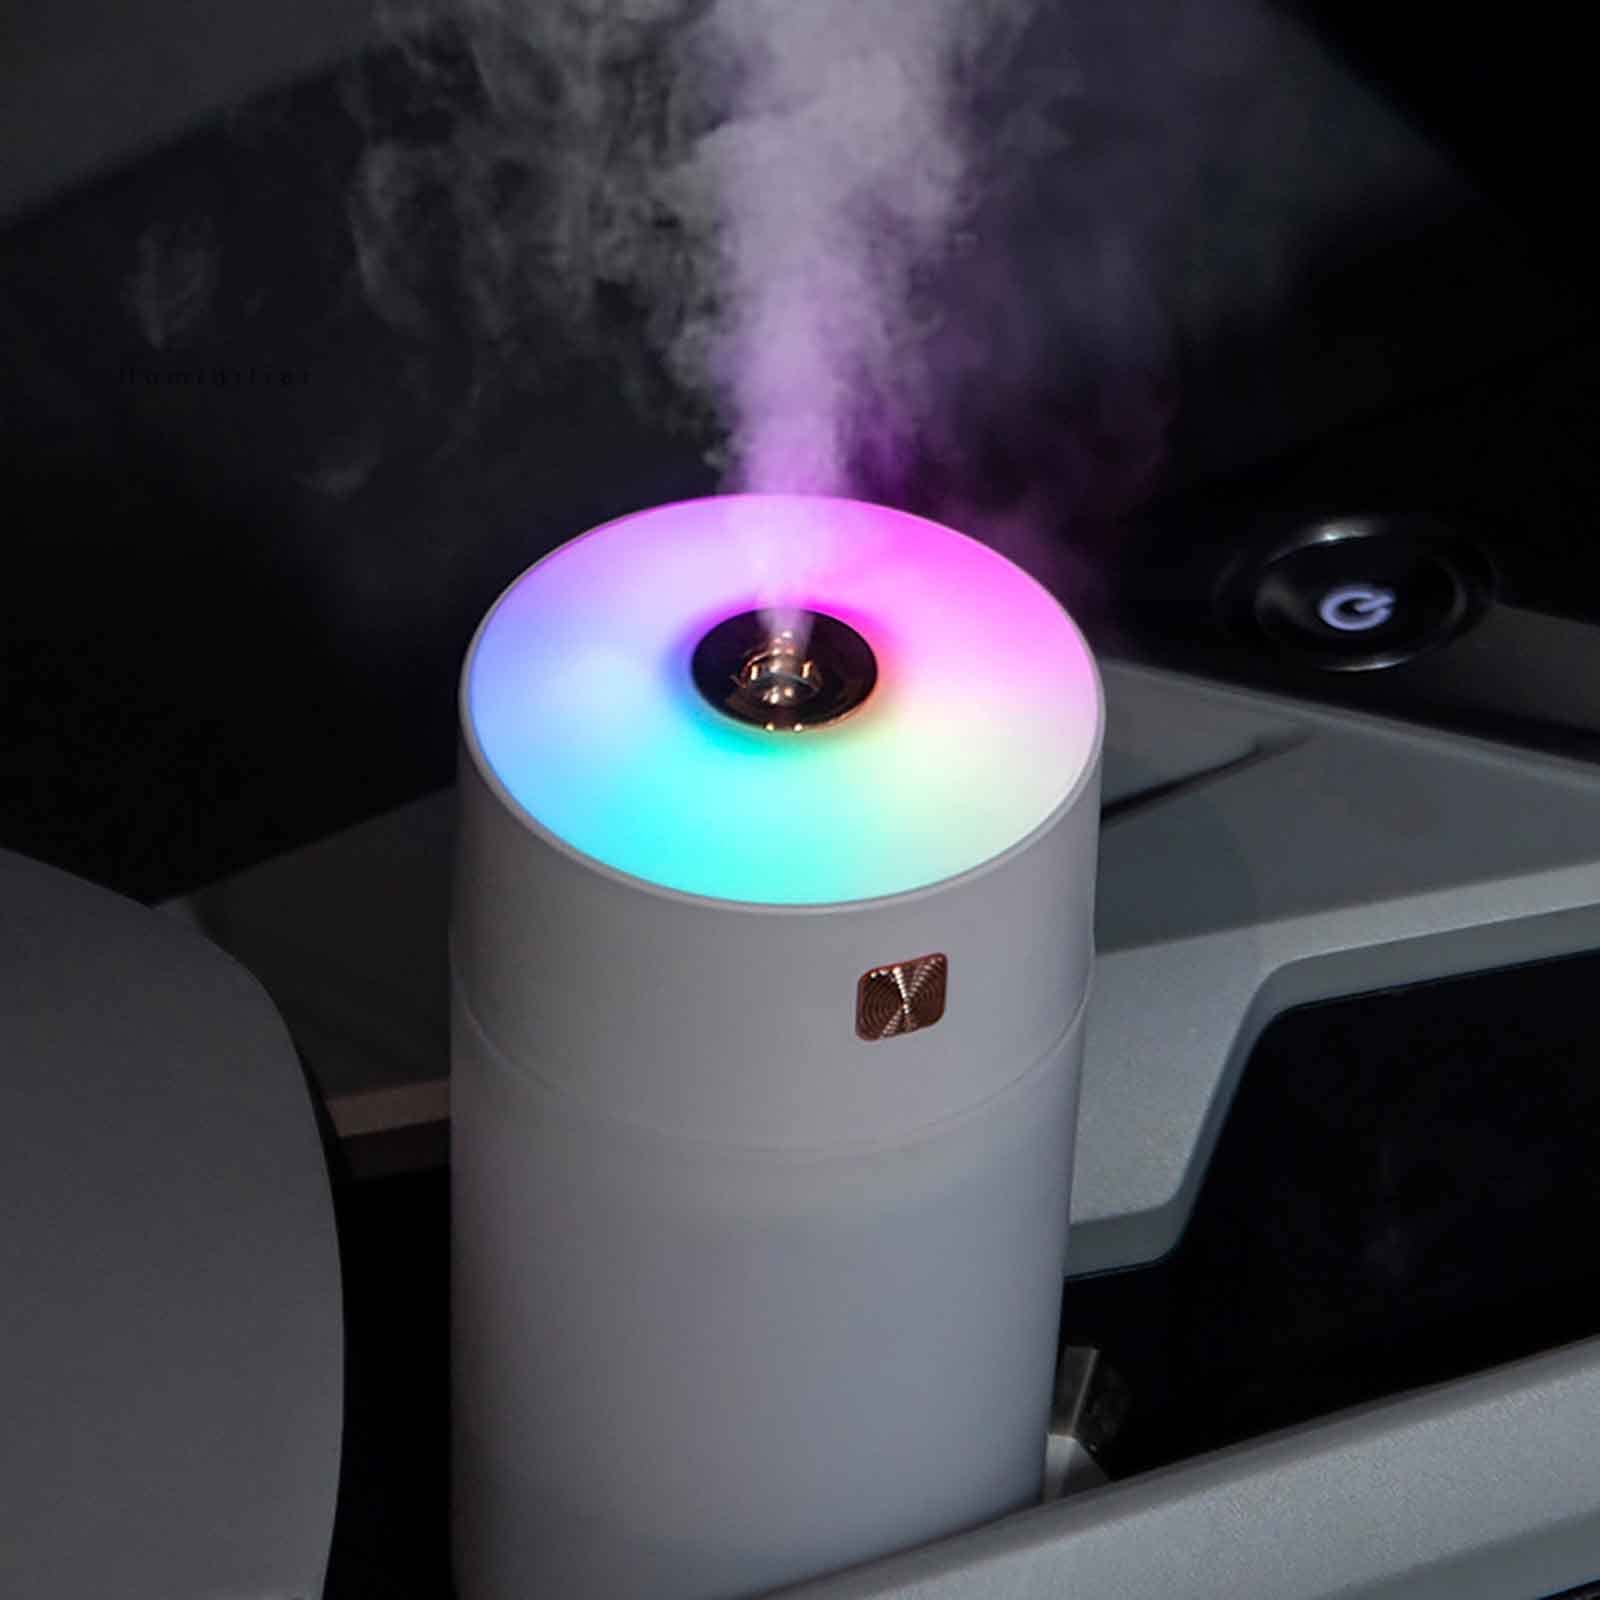 VIO 300ML Rainbow Cup Car Humidifier USB Mini Mist Gift Aromatherapy, Portable Air Humidifier Cold Mist Humidifier Suitable for Cars Offices Indoors Bedrooms (Grey)